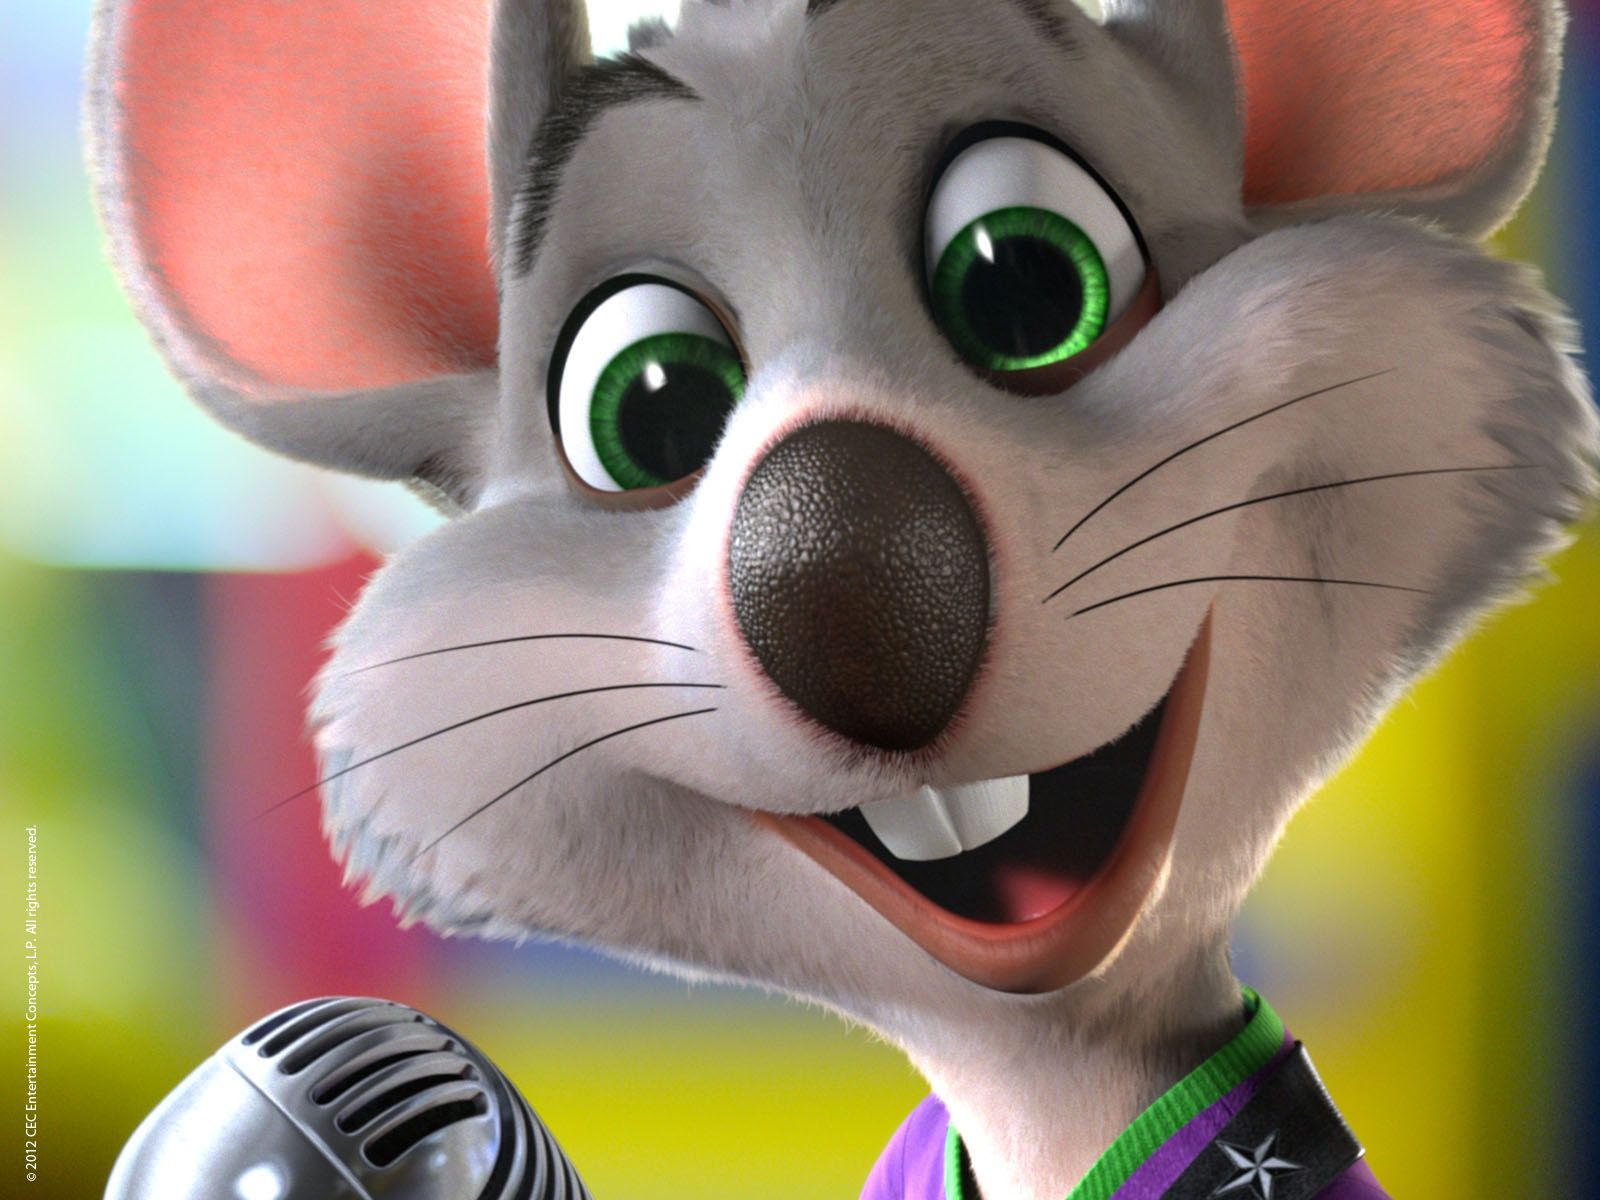 Chuck E Cheese parent files for Chapter 11 bankruptcy